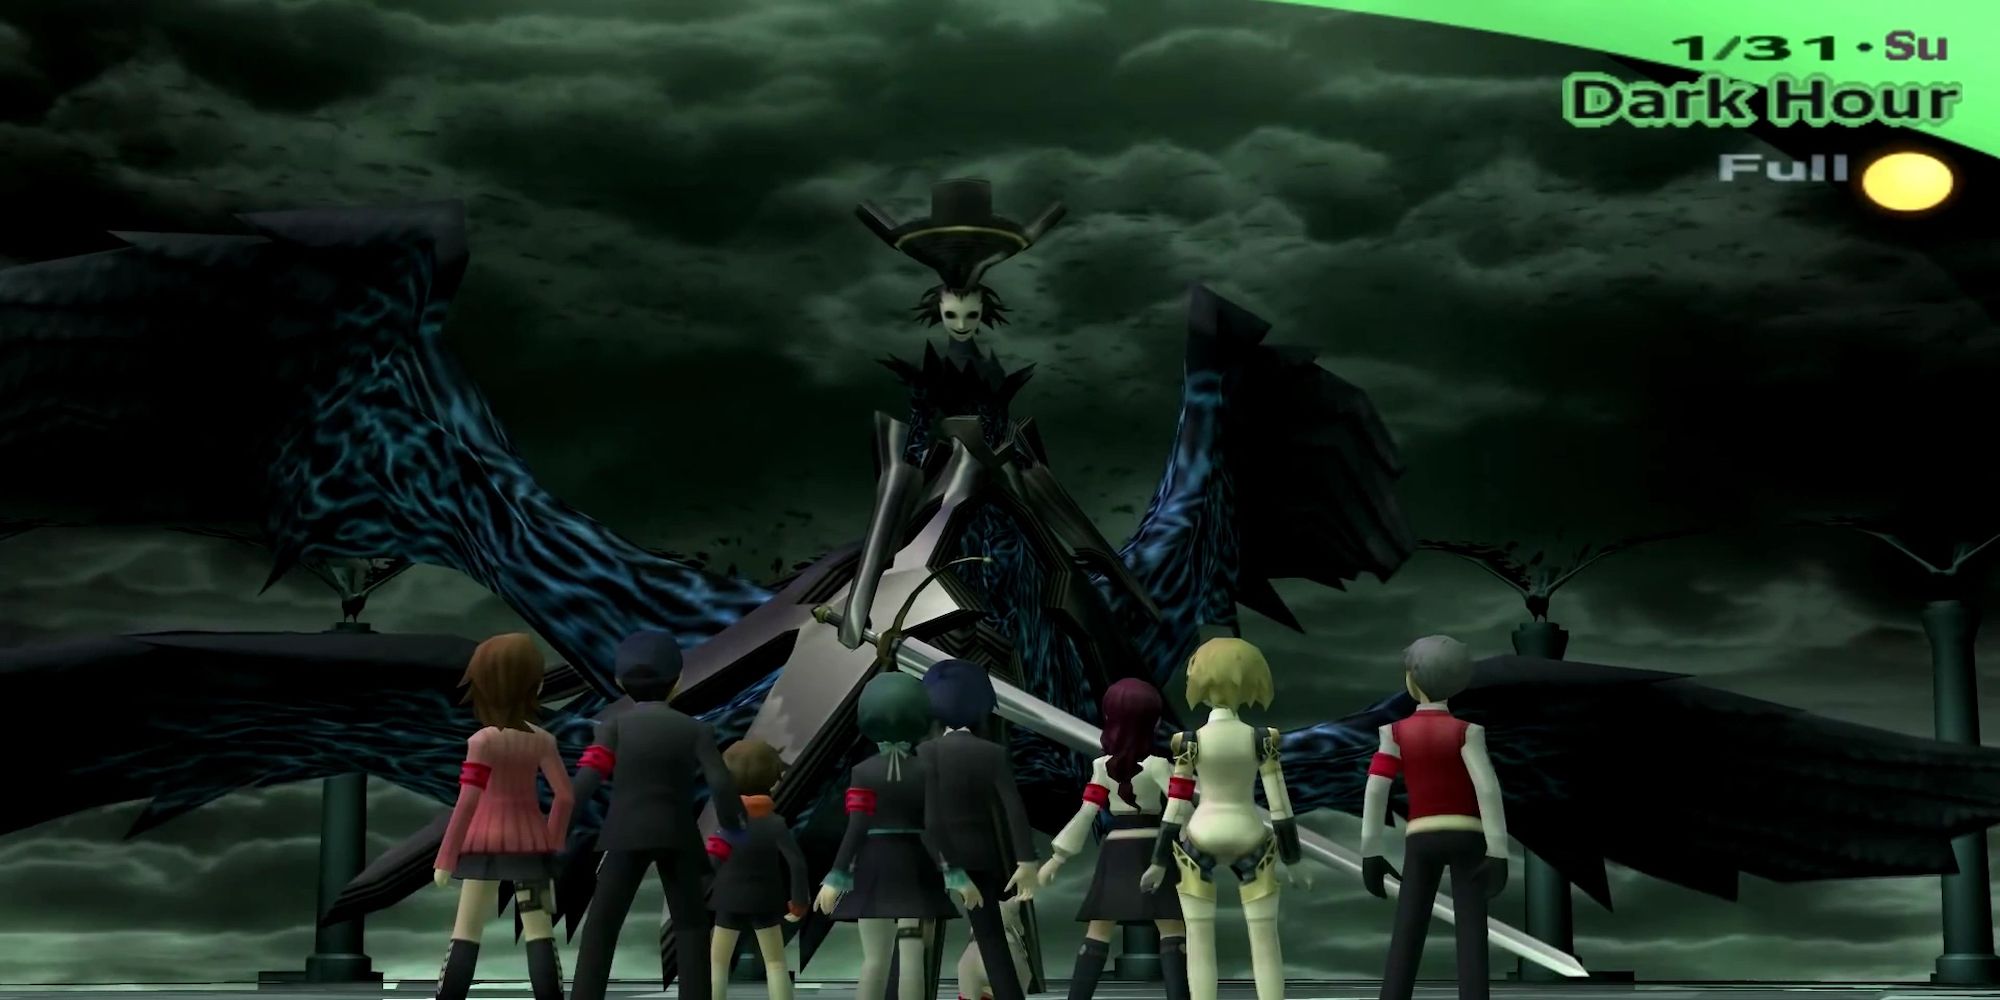 Nyx Avatar looming over the main characters (Persona 3)